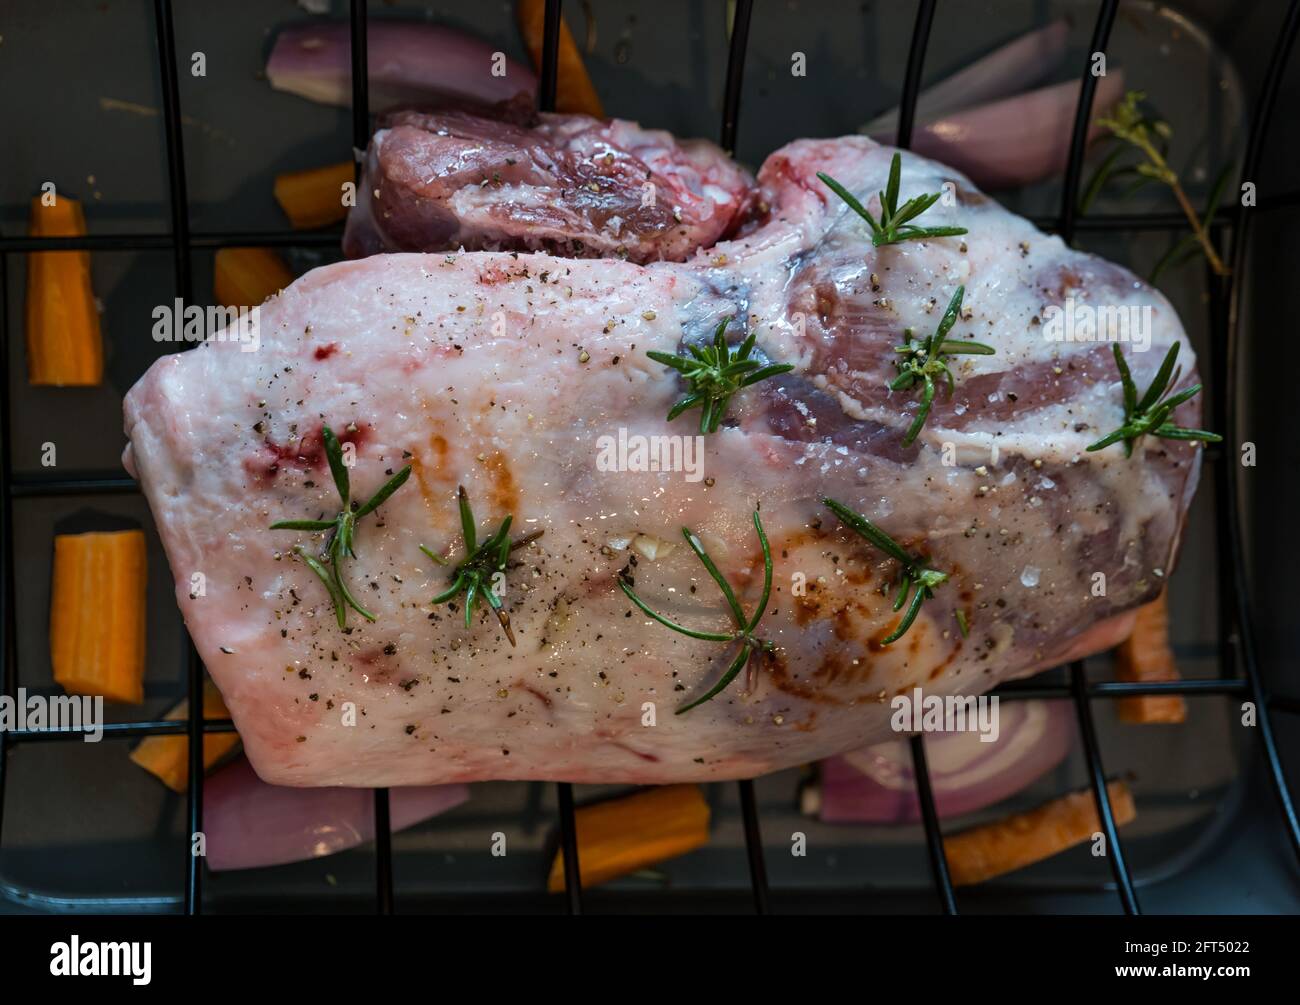 Briggs Shetland Spring leg of lamb and chump in roasting tray prepared ready for cooking with rosemary sprigs and seasoning Stock Photo